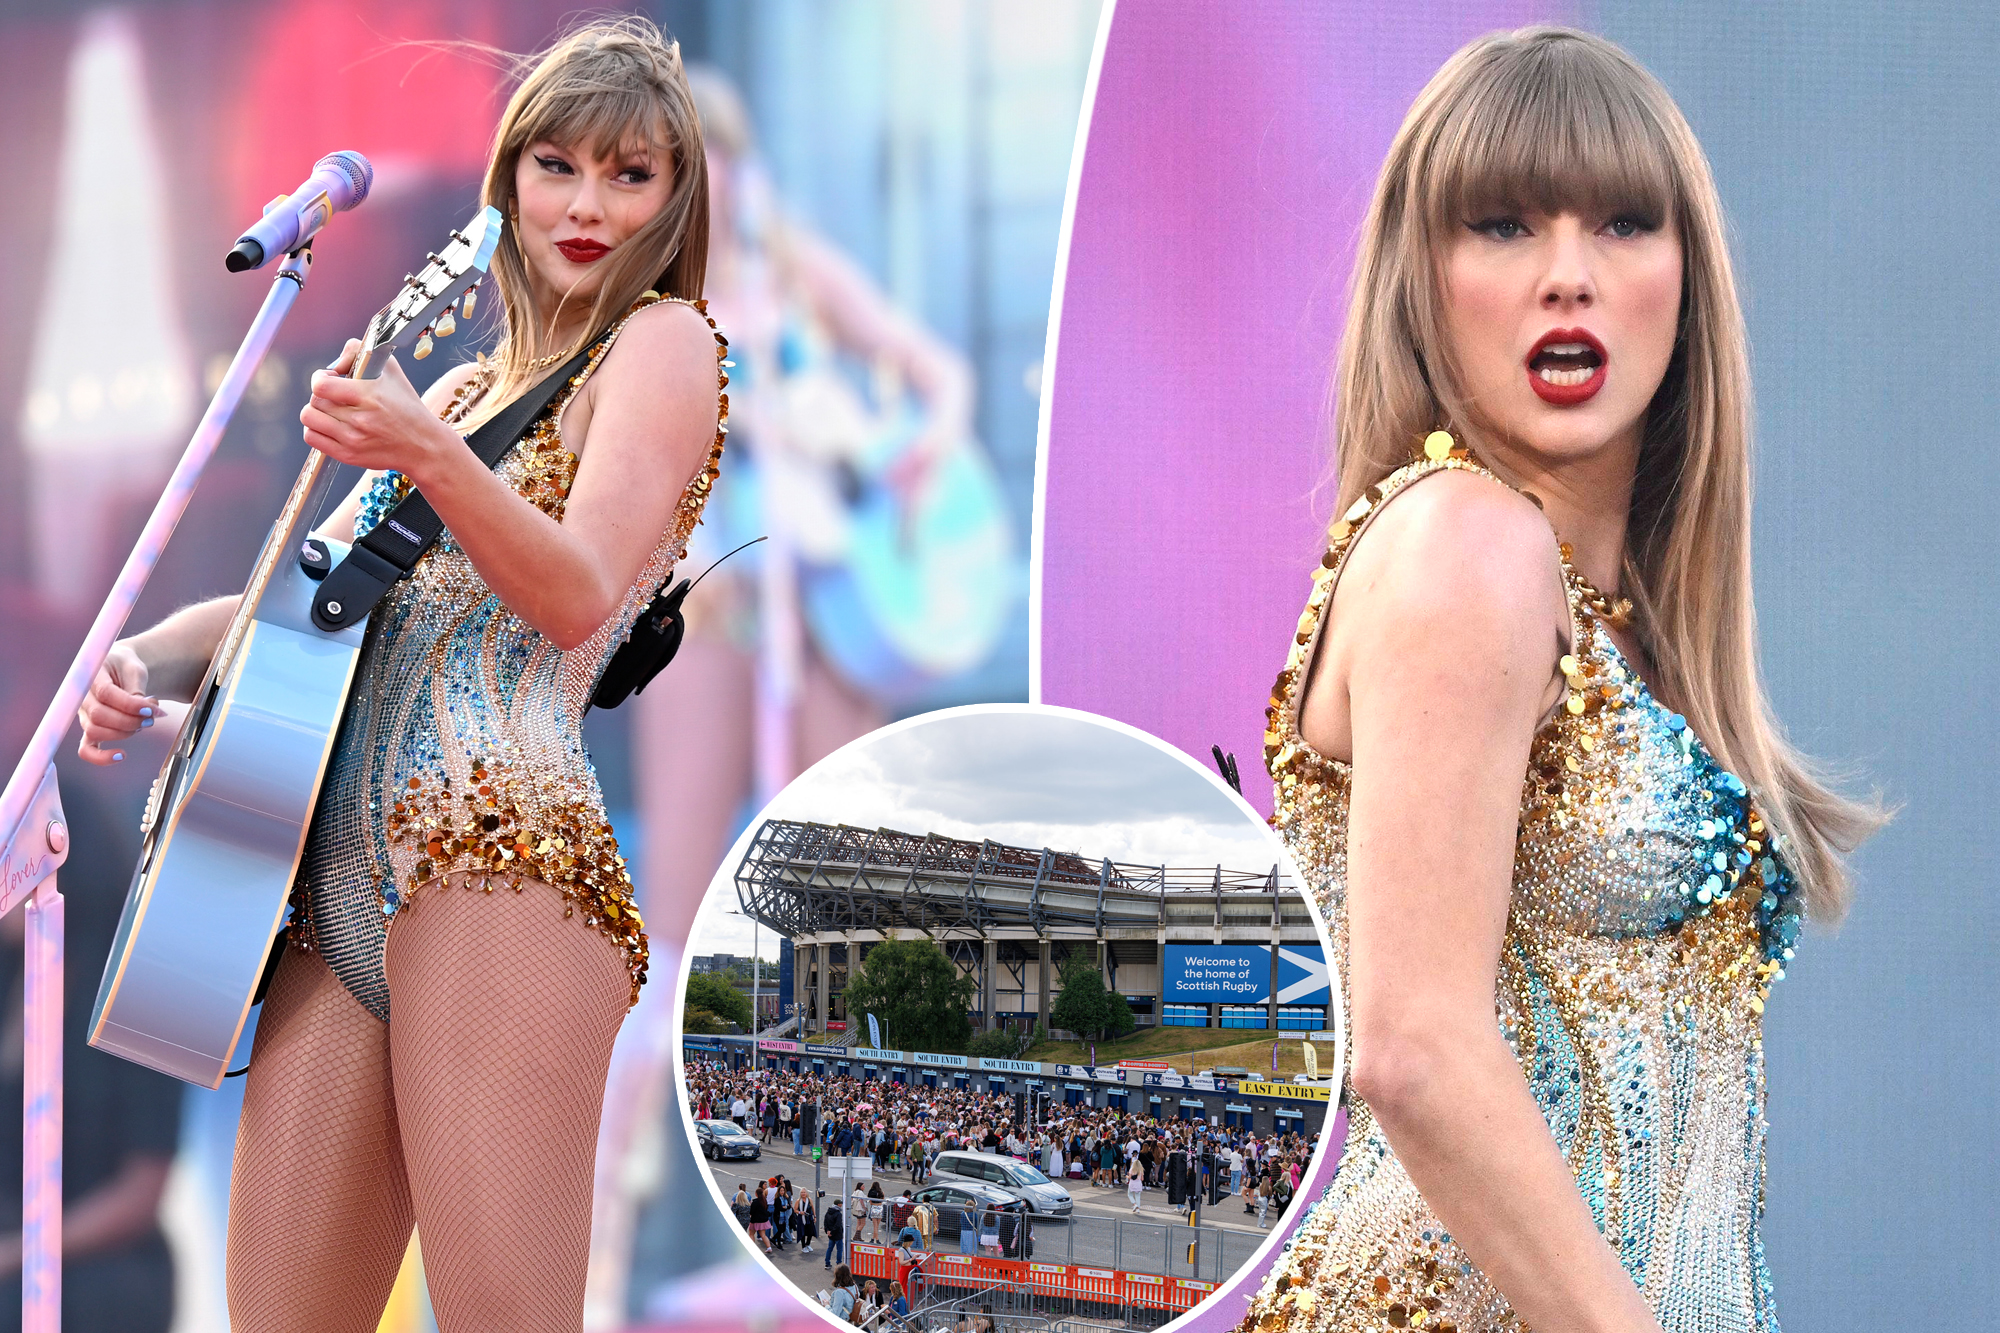 Perverted Incident at Taylor Swift Concert in Scotland Leads to Arrest of 64-Year-Old Man